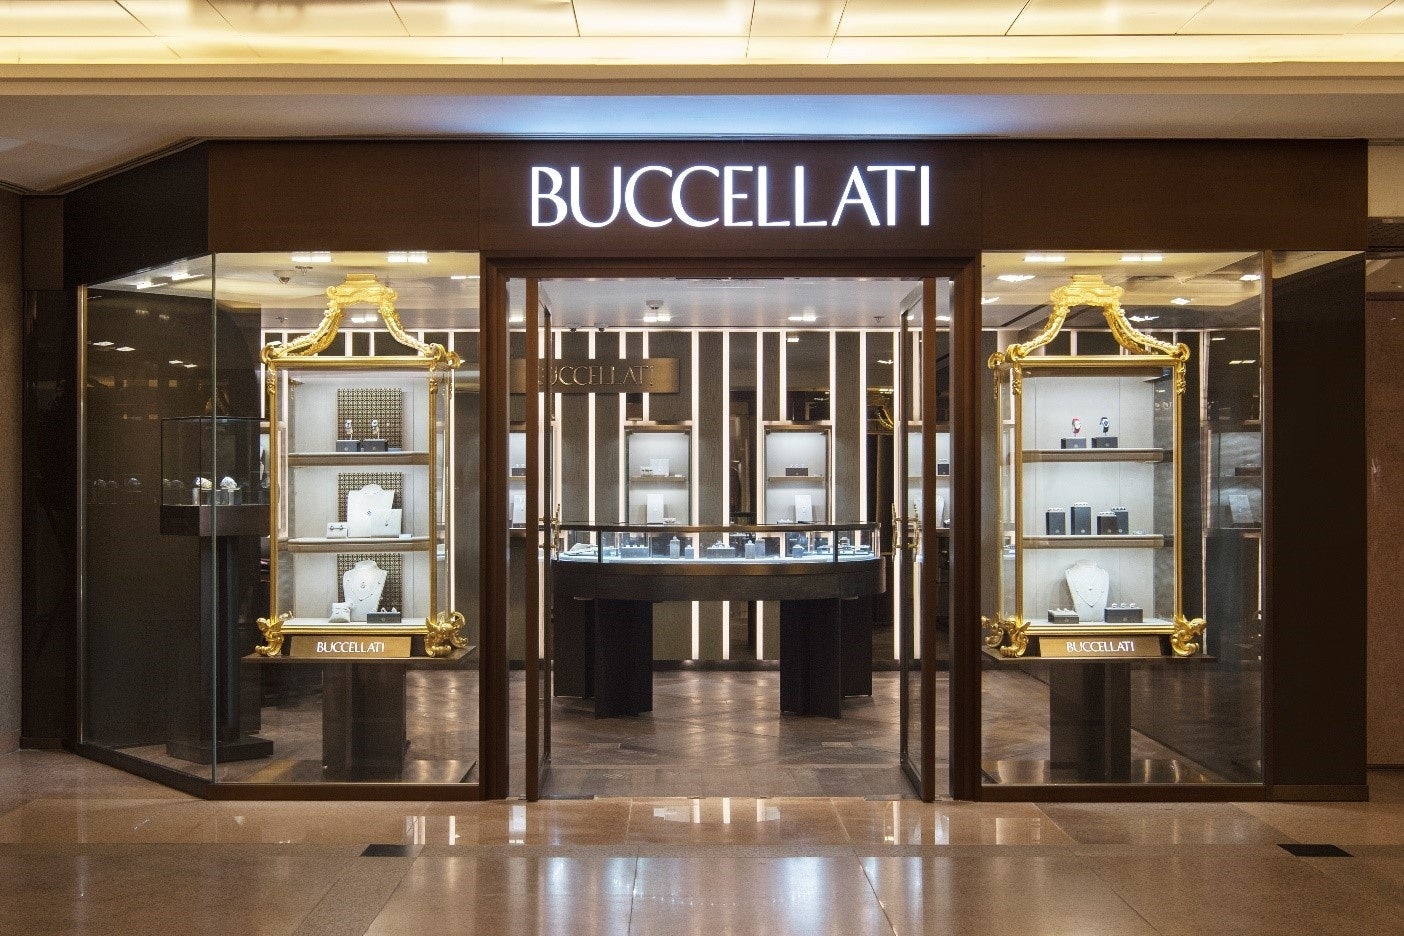 Buccellati opened its flagship store in China in Shanghai’s Plaza 66 in November 2017. It opened additional outlets in Shanghai and Beijing. Courtesy photo